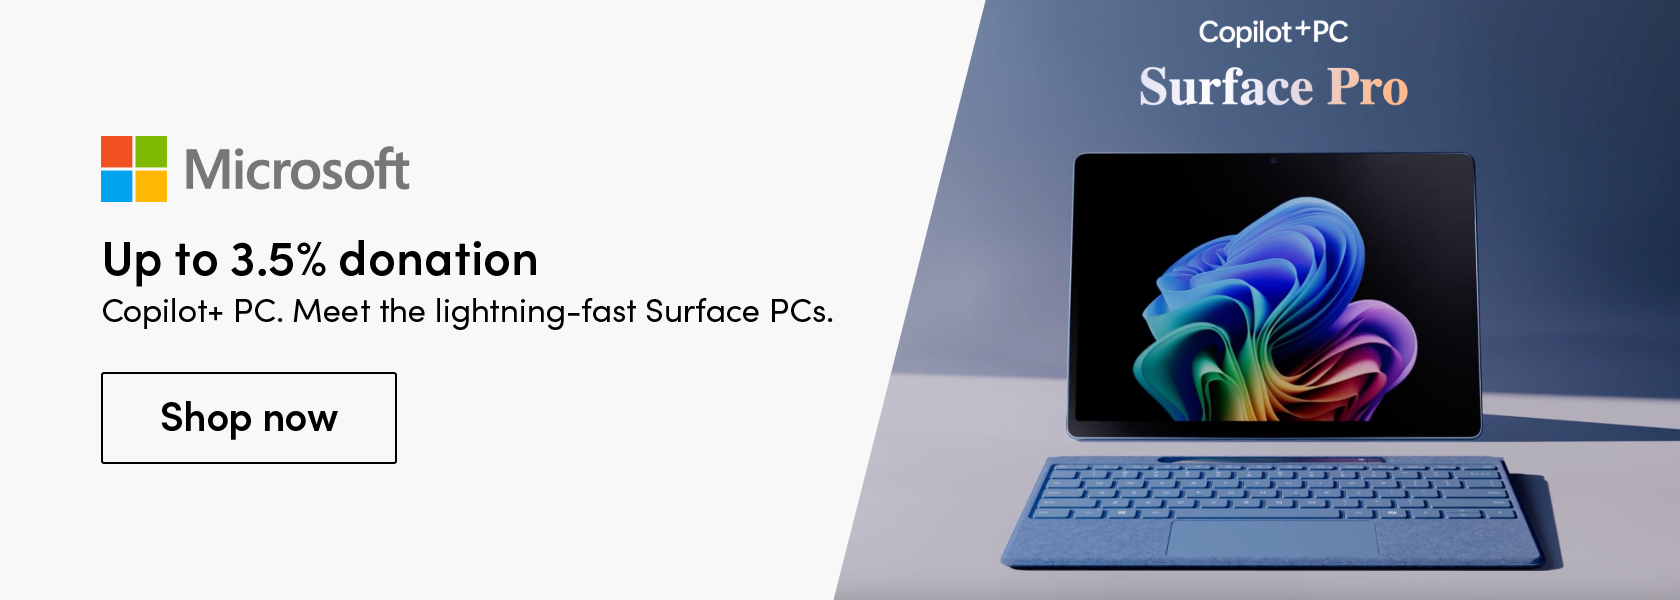 Copilot+ PC. Meet the lightning-fast Surface PCs. Shop now Up to 3.5% donation 